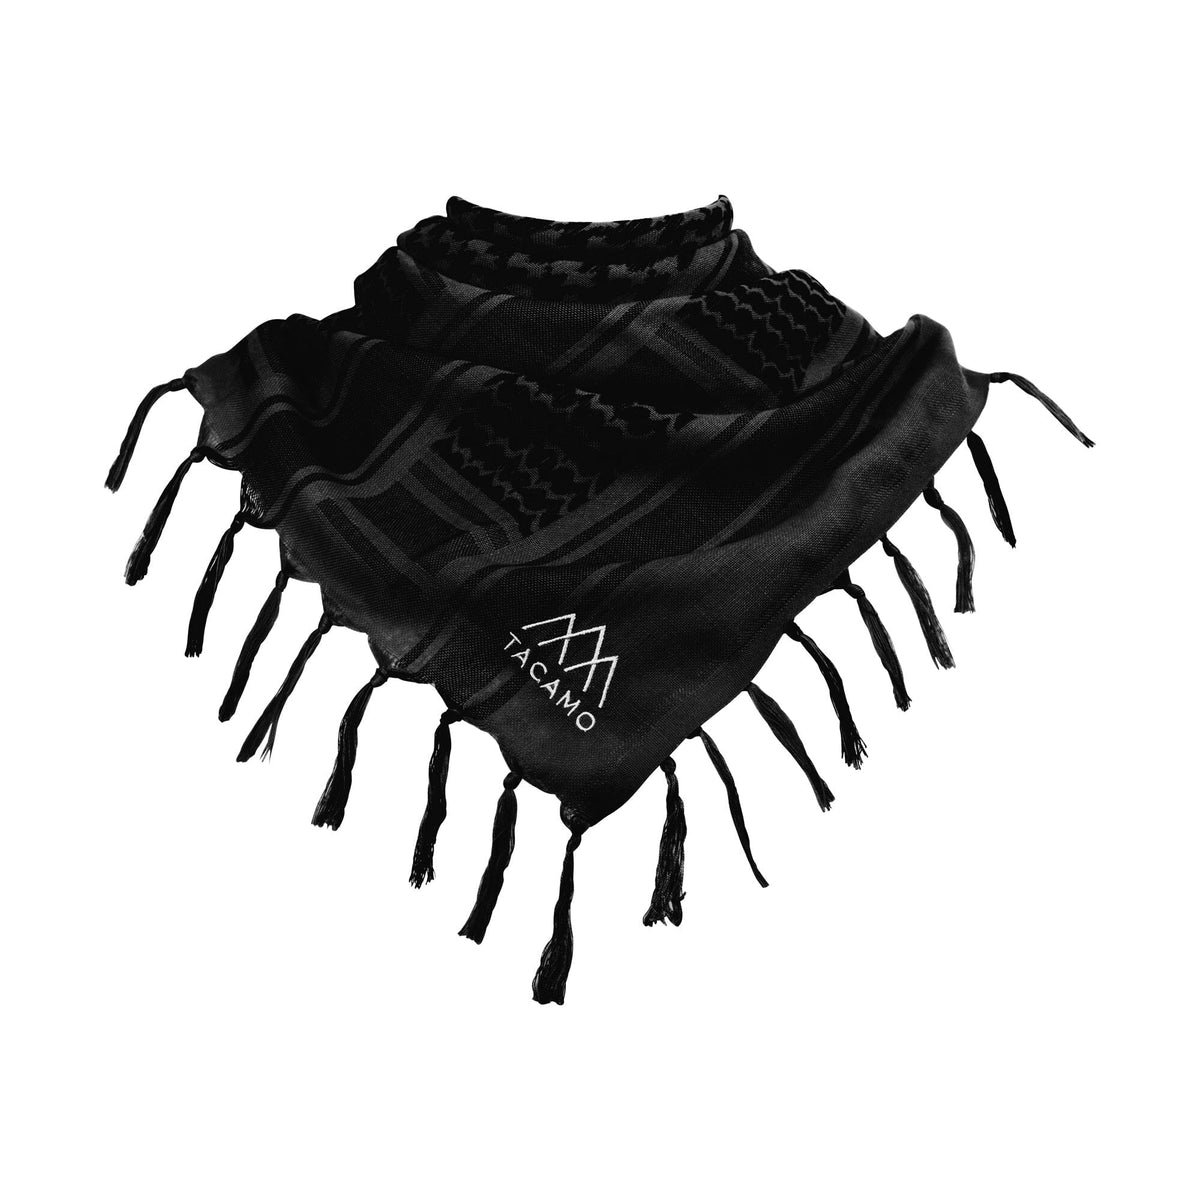 Tactical Shemagh Scarf - Tactical Black